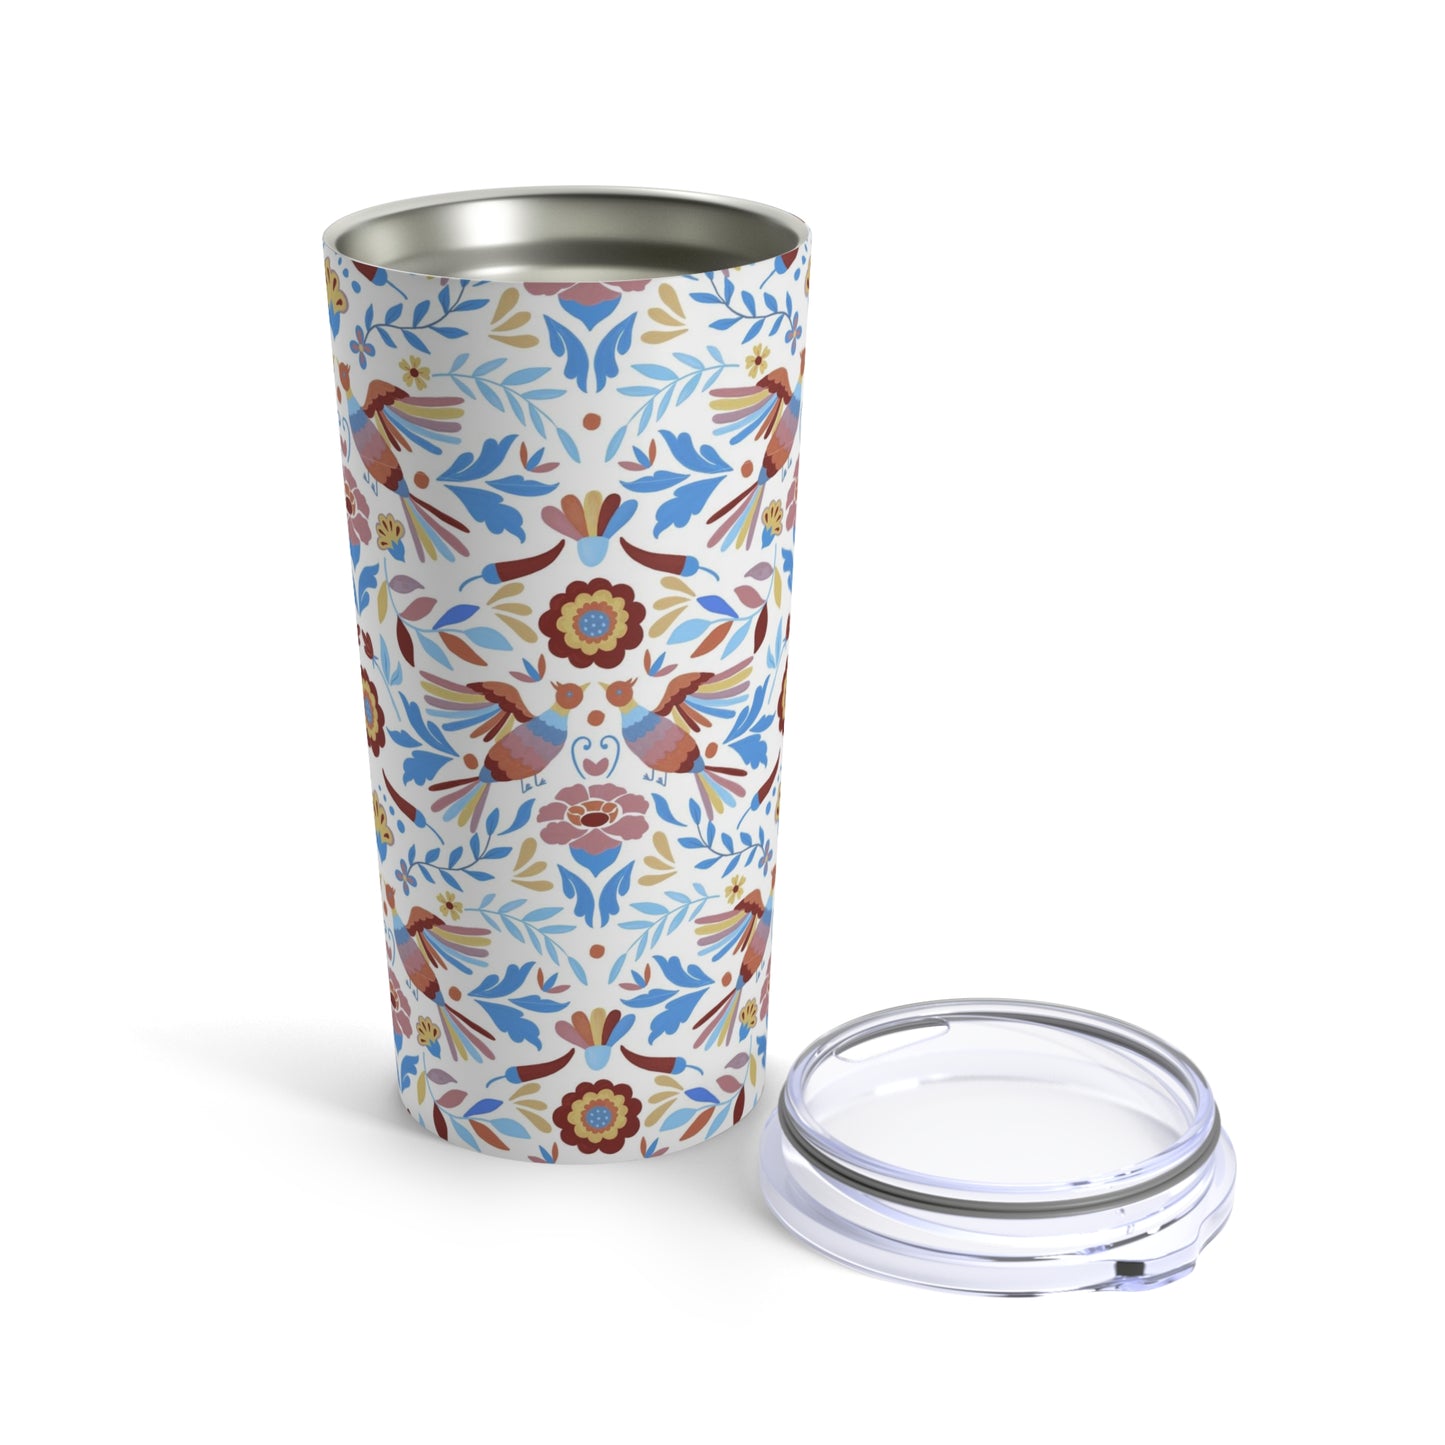 Mexican folk Tumbler for her. 20oz tumbler with Mexican art. Birthday gift for friend, family or teachers. Otomi tumbler